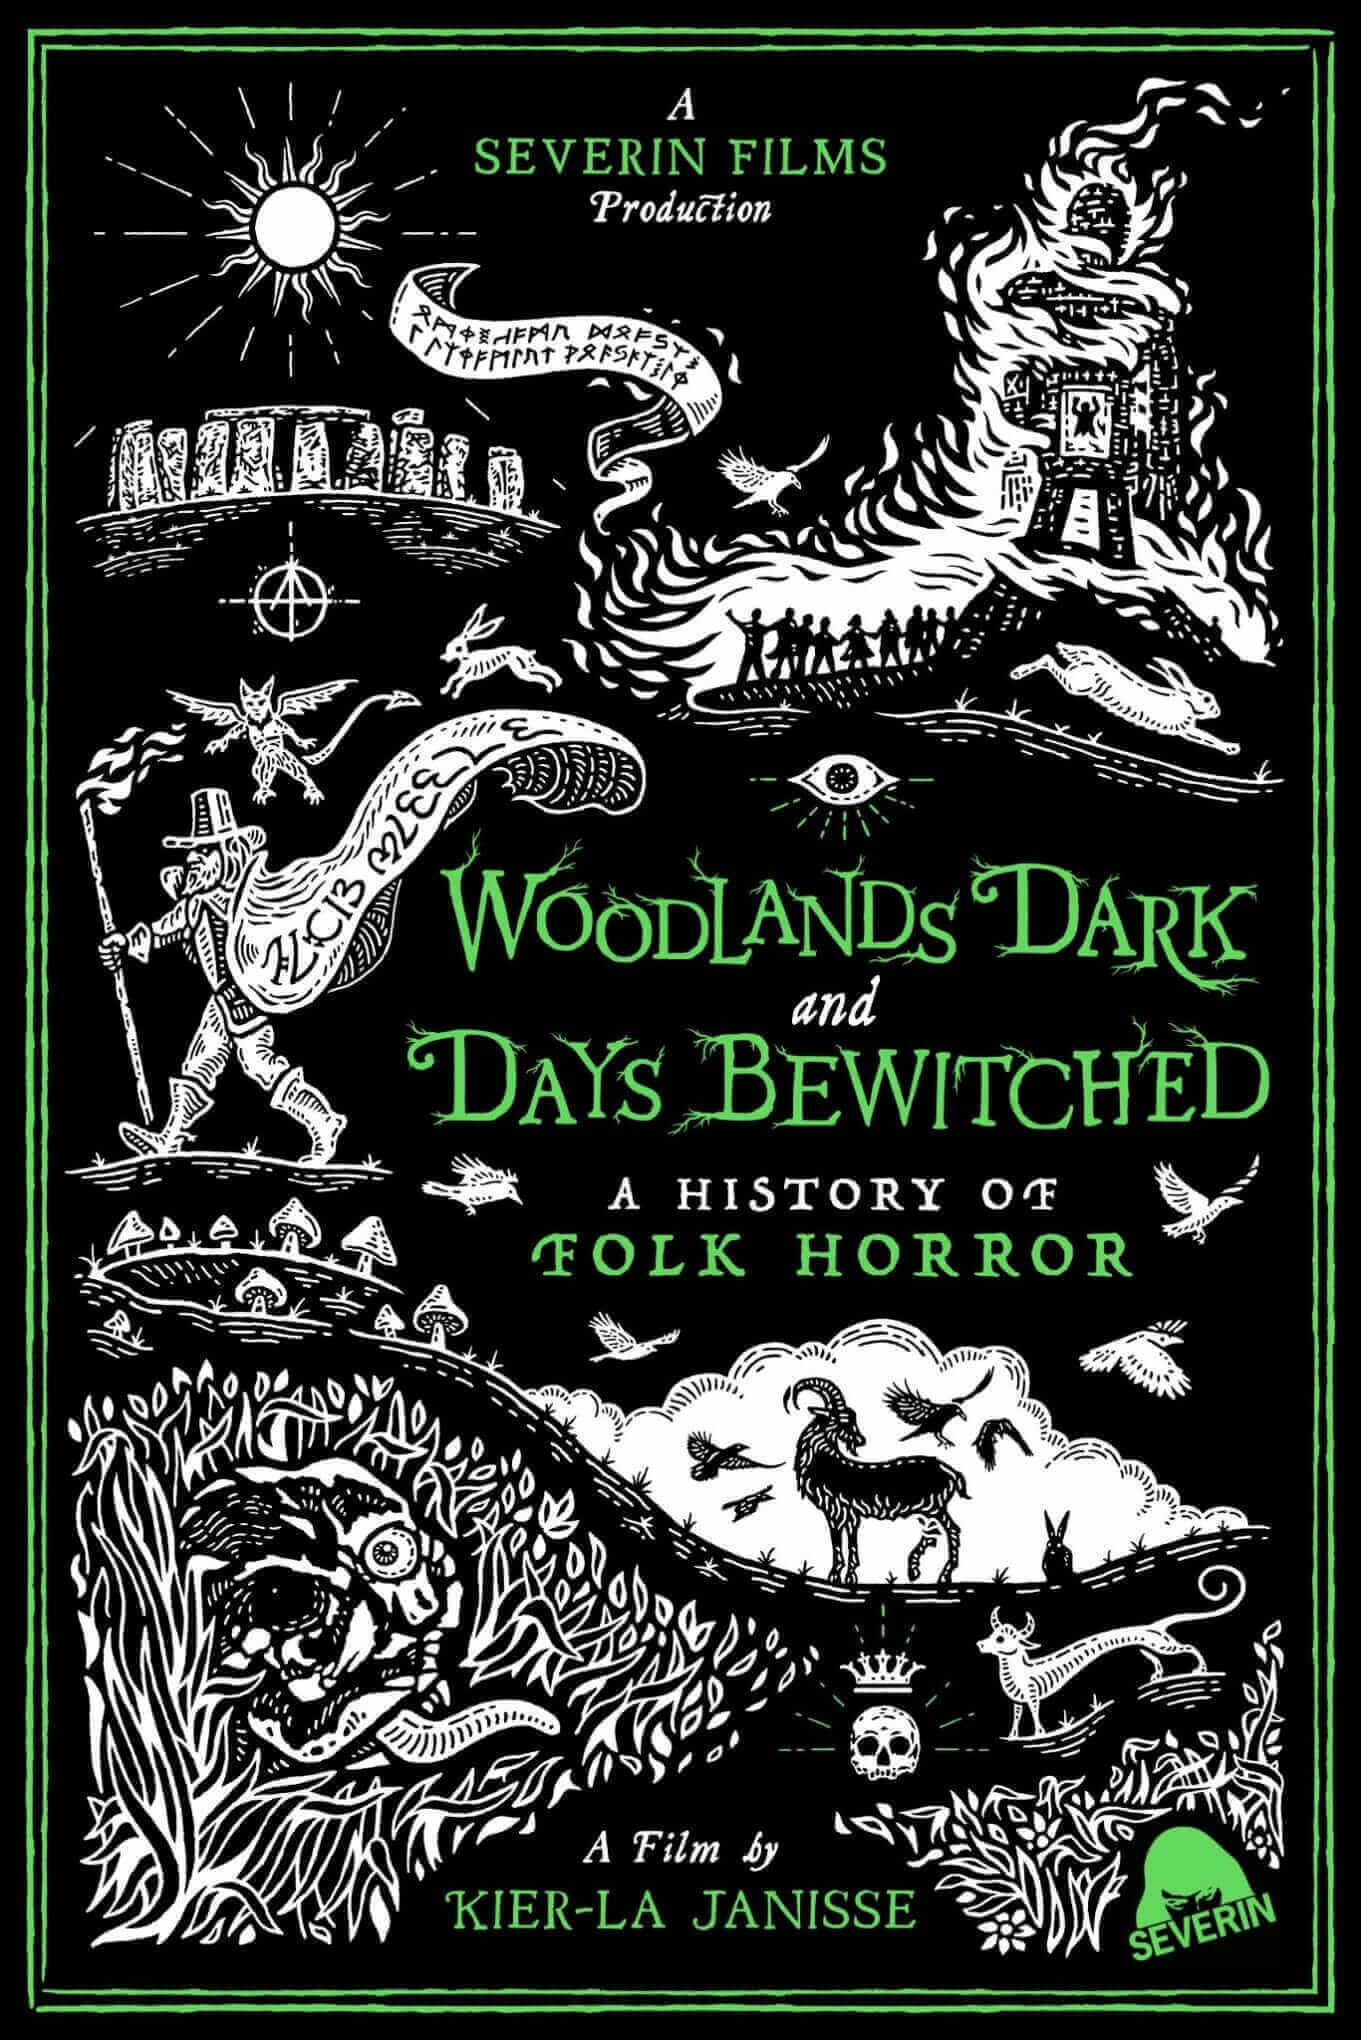 Woodlands-Dark-And-Days-Bewitched-Poster-2021